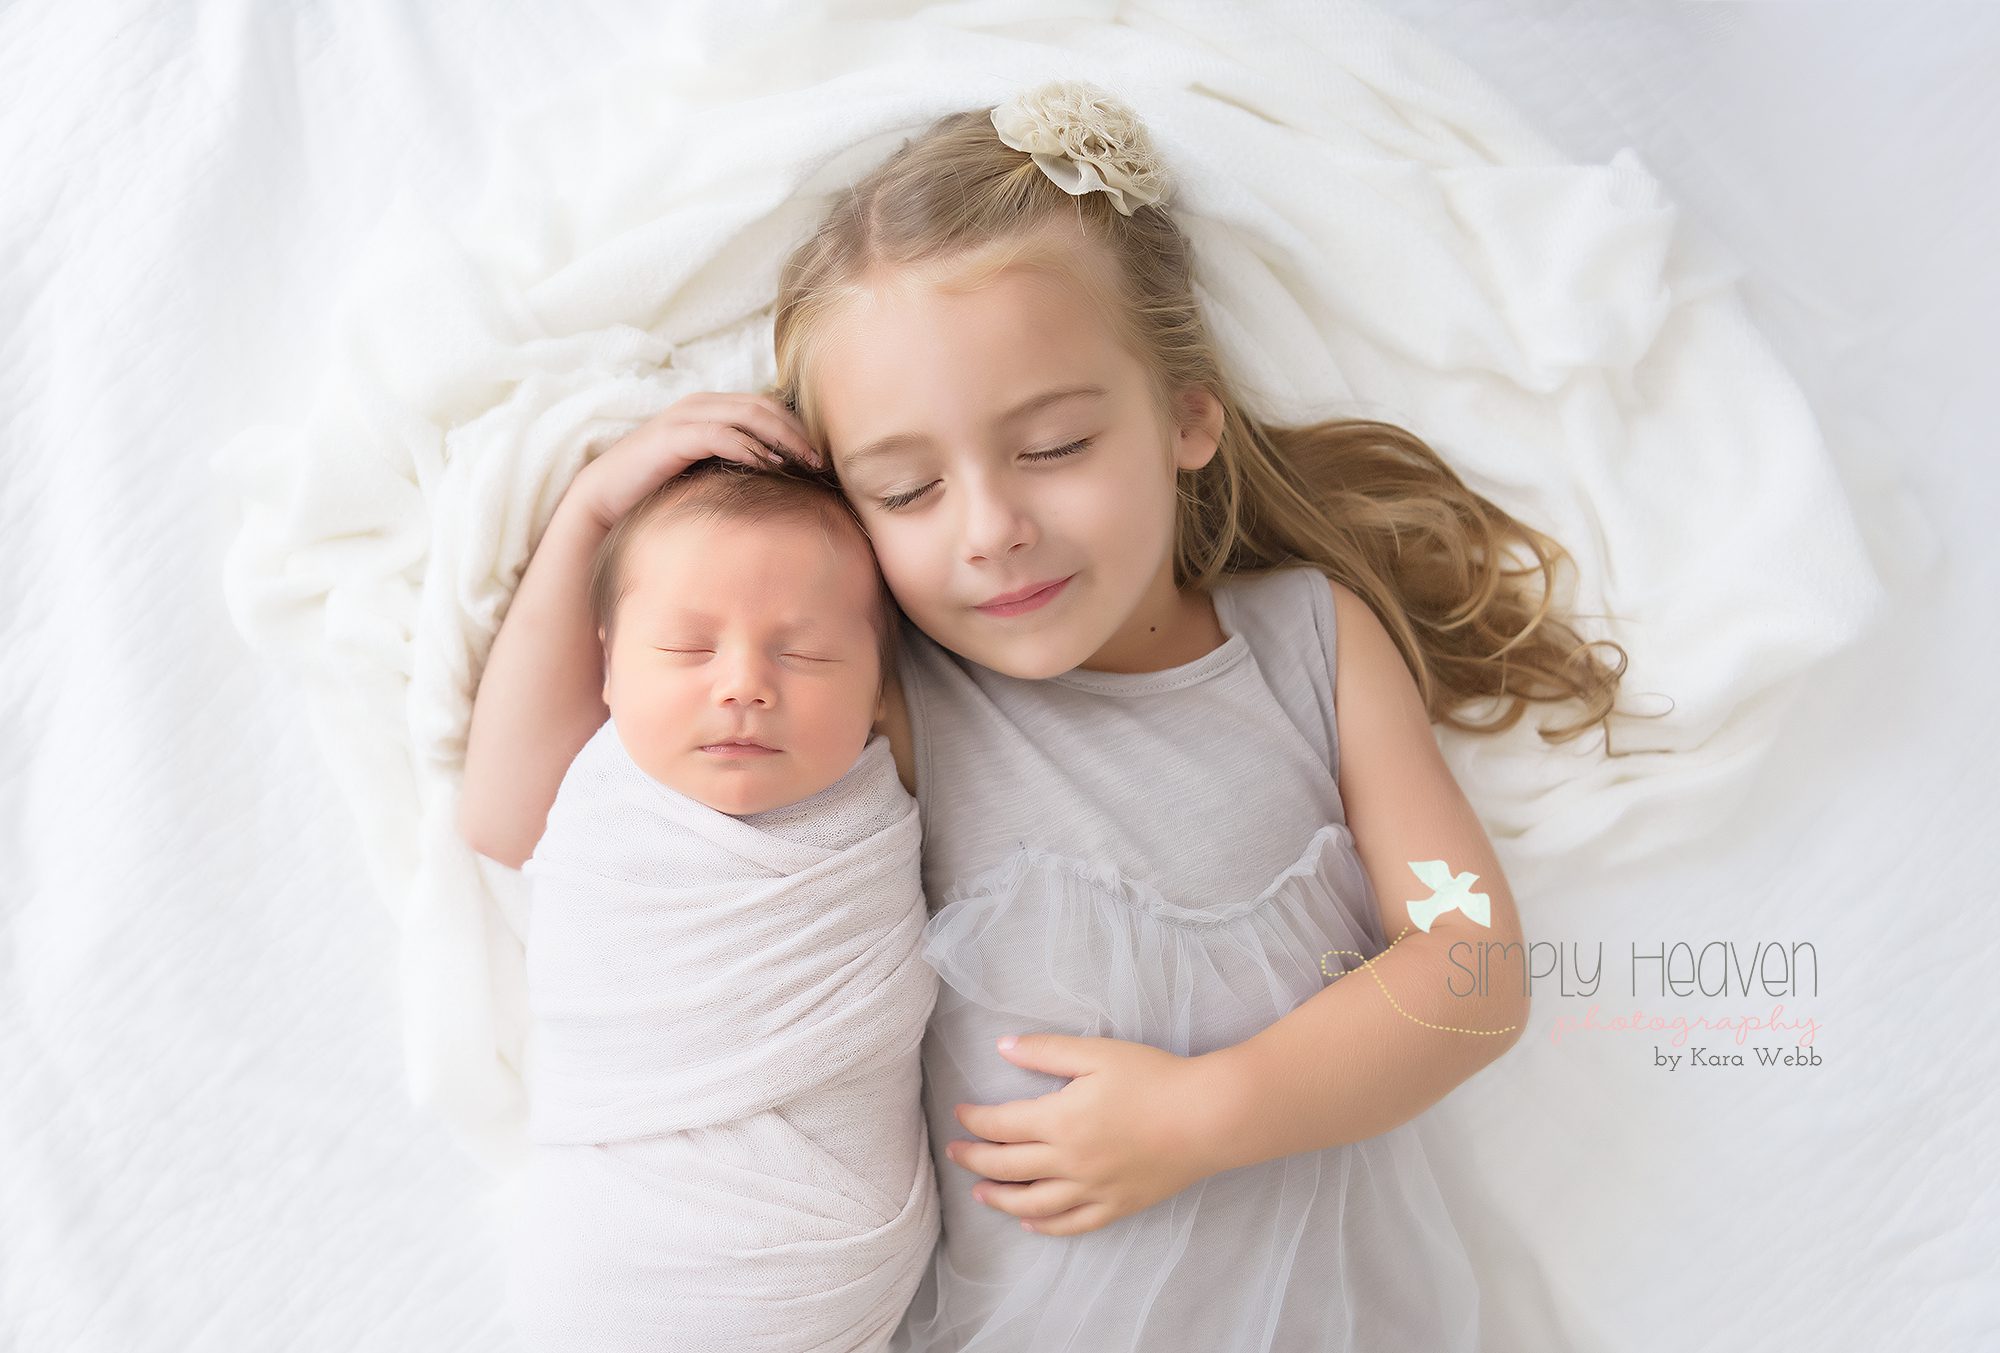 Lifestyle or Traditional Newborn Session: Which is Right for You